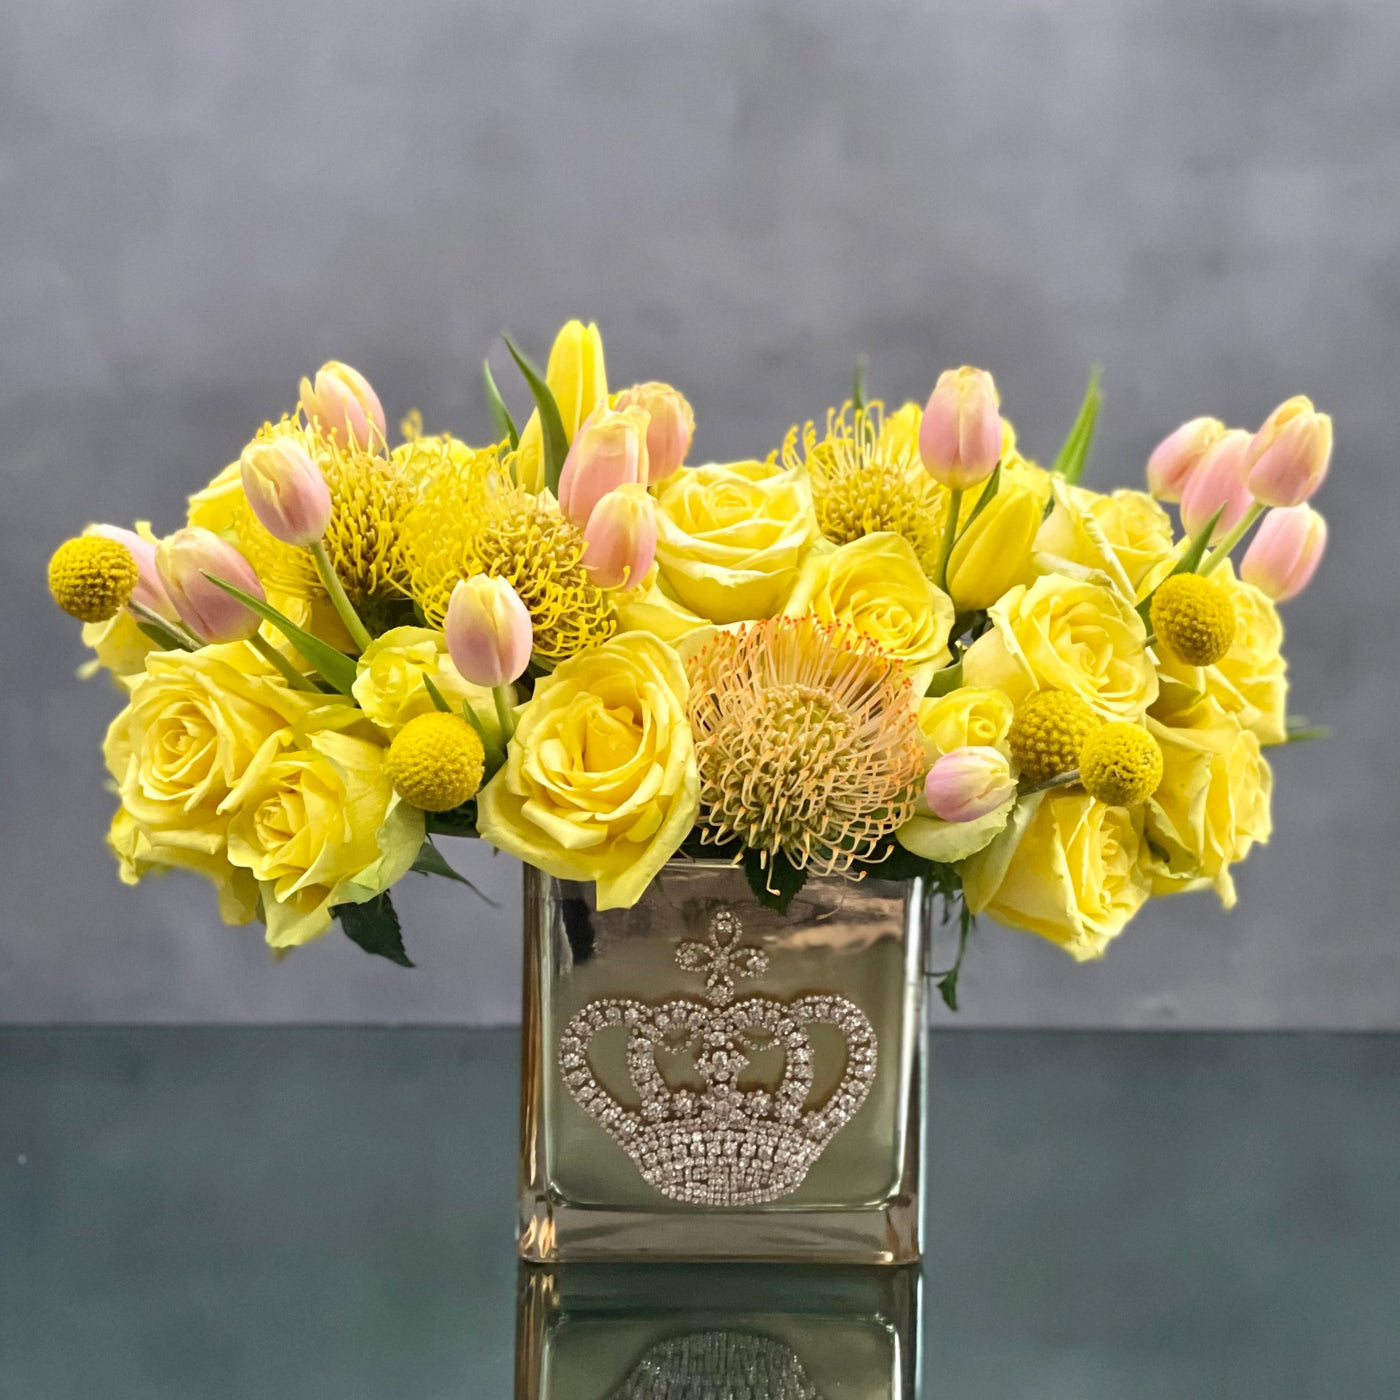 Beverly Hills Florist offers Queen Bee for same day delivery! This striking arrangement of yellow roses, tulips and protea in a gold crown jeweled glass vase. Fit for a queen! Wonderful for a Thank you, Friends day or a pick me up !